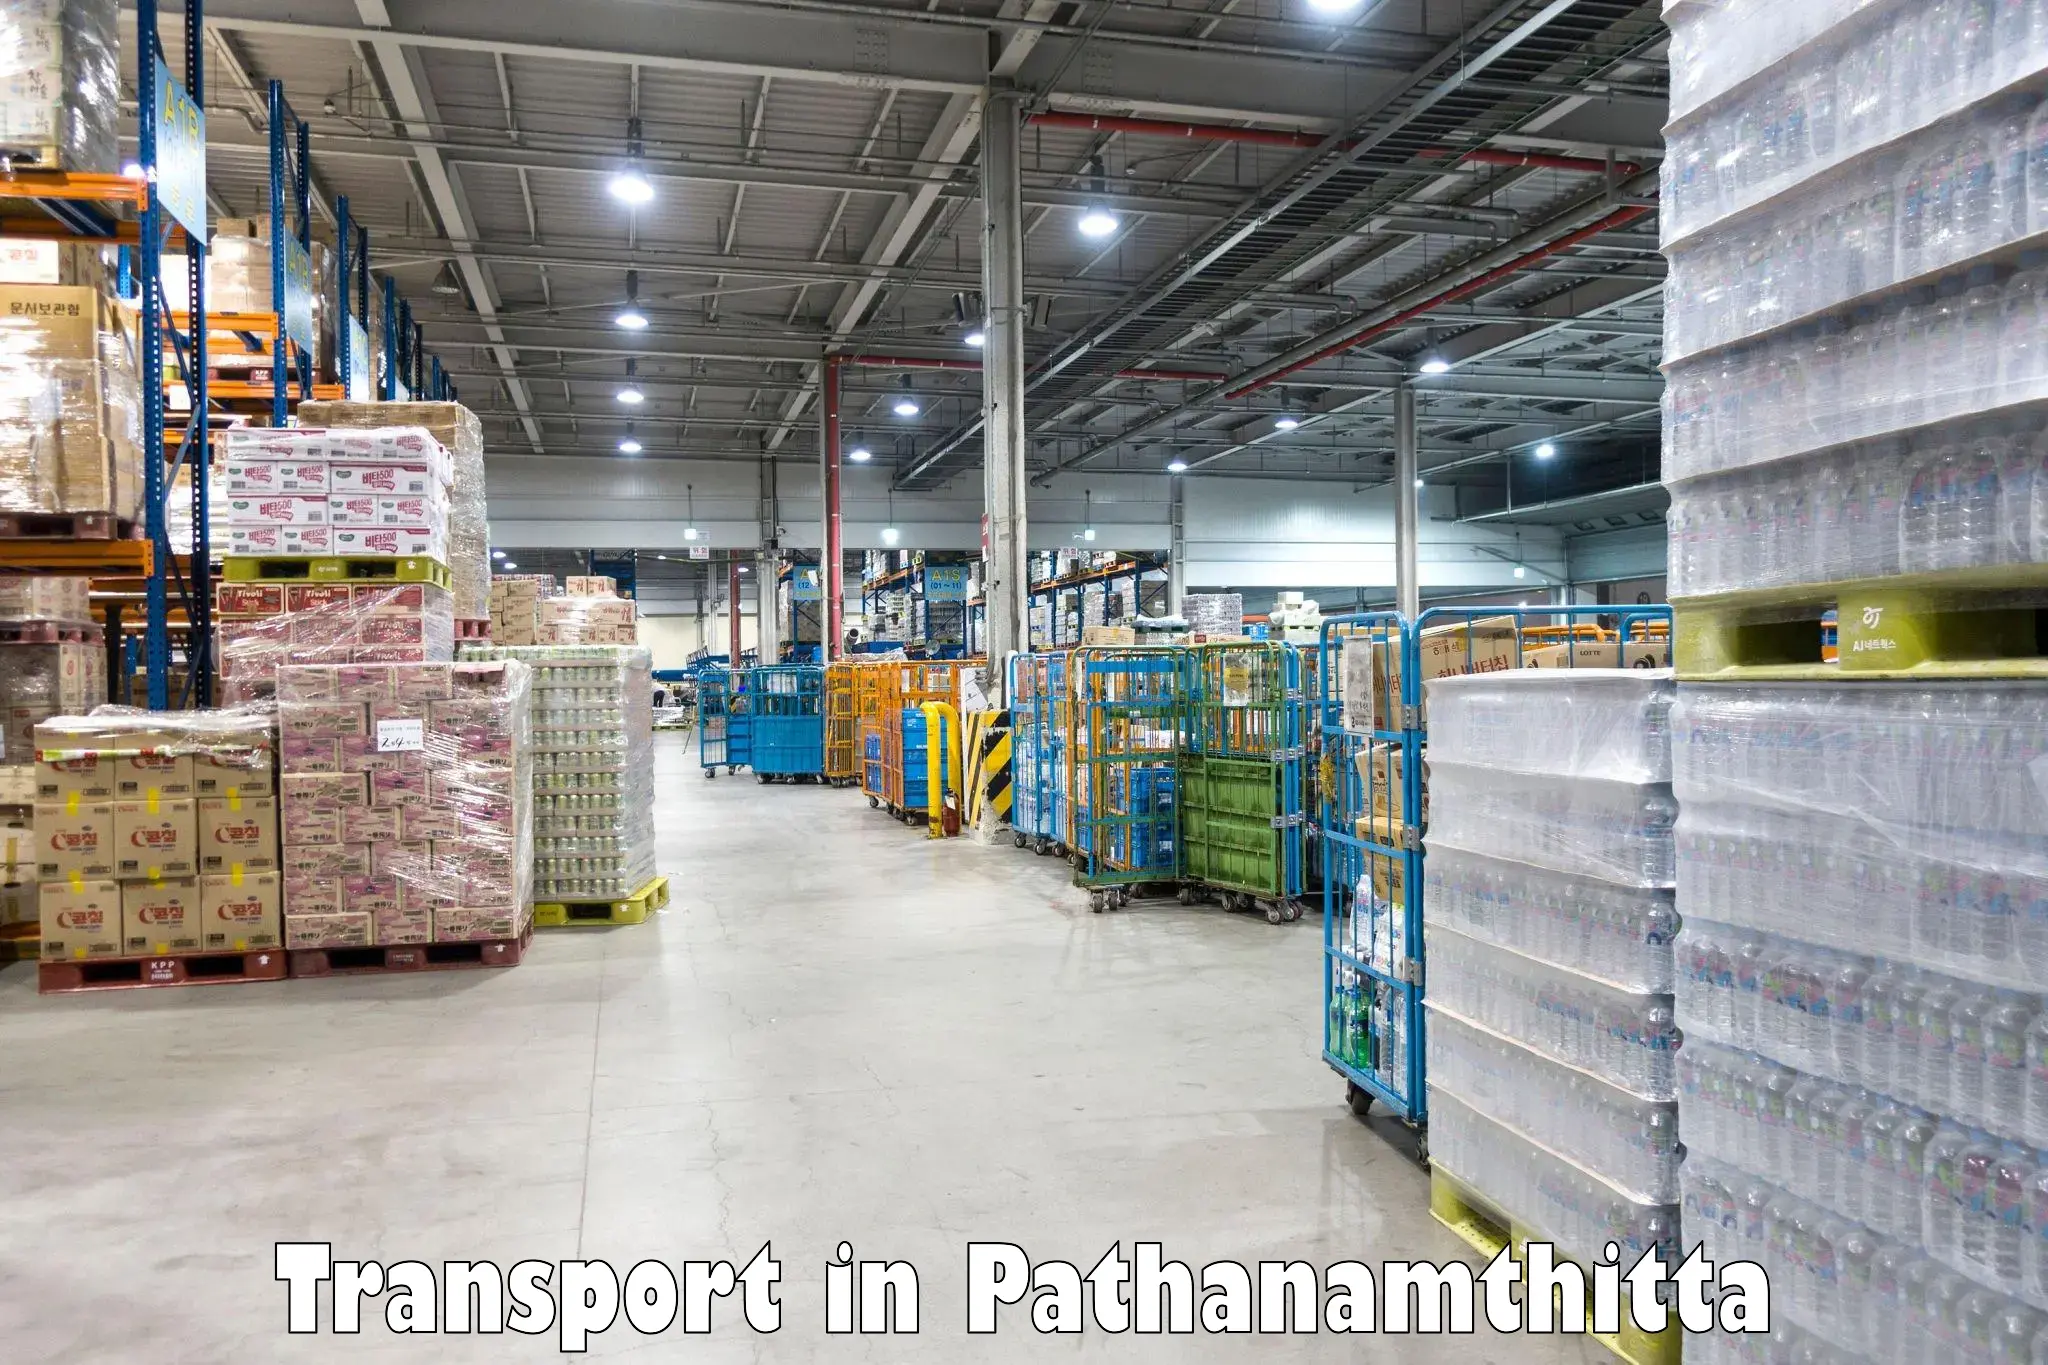 Online transport booking in Pathanamthitta